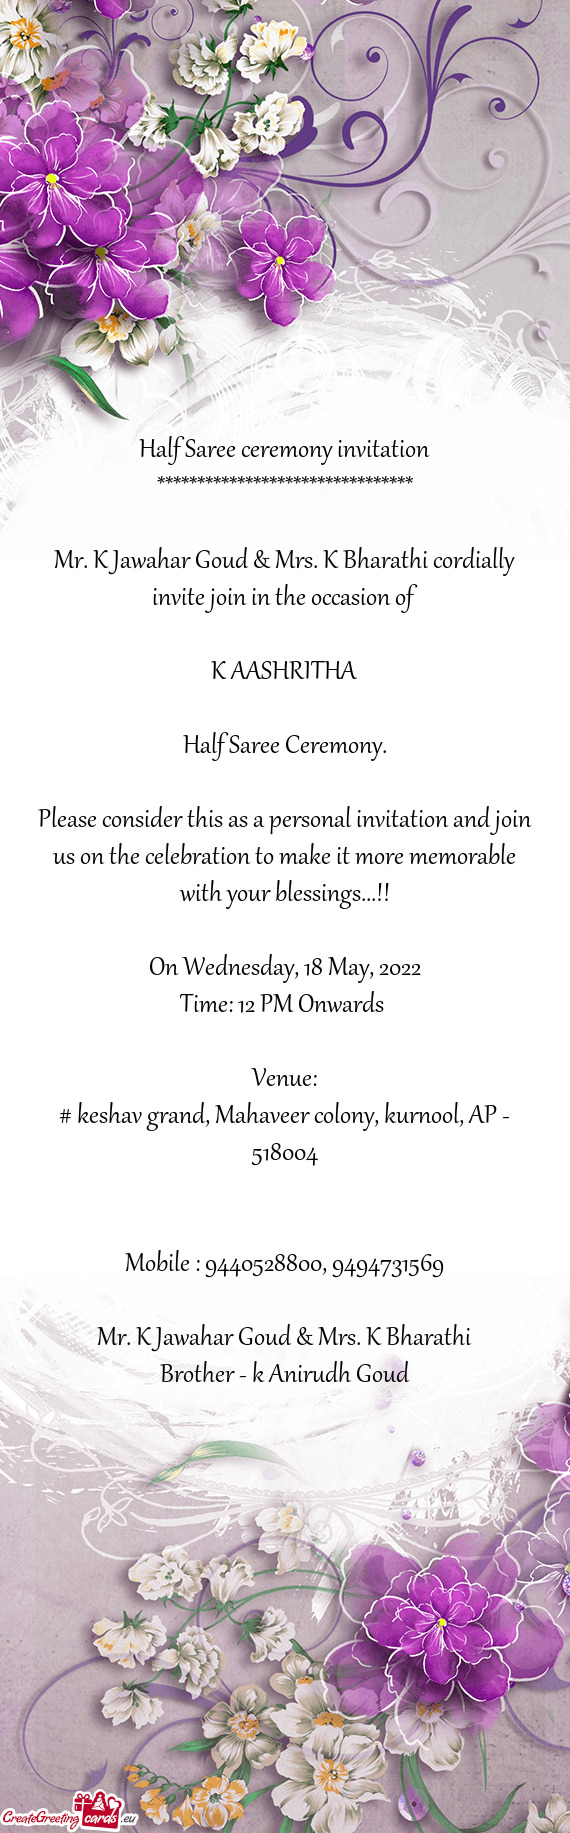 Mr. K Jawahar Goud & Mrs. K Bharathi cordially invite join in the occasion of